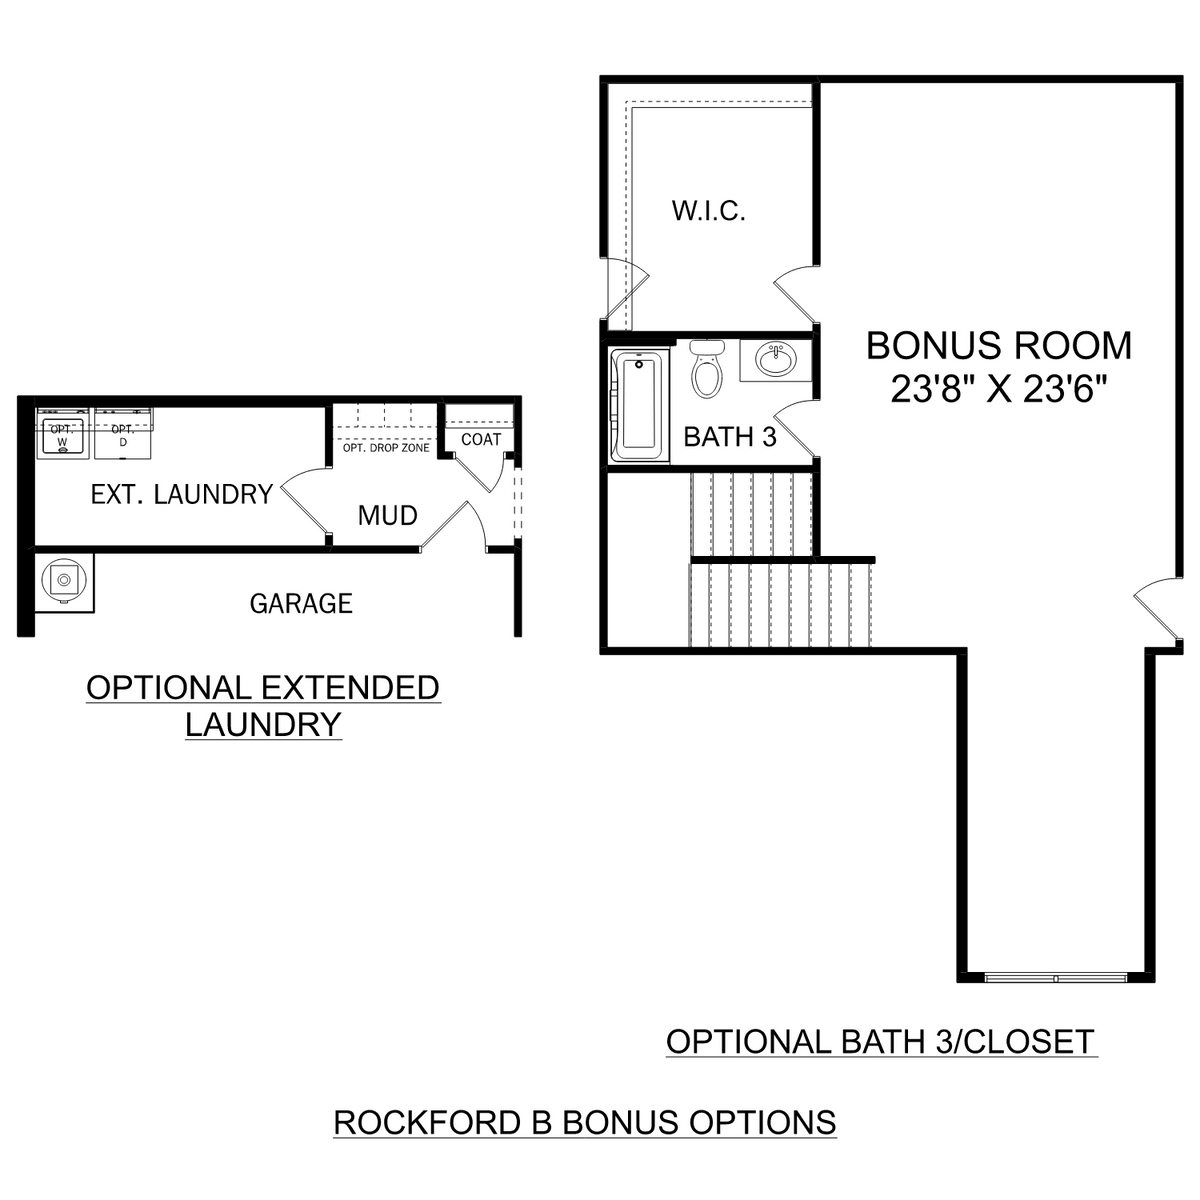 3 - The Rockford B with Bonus buildable floor plan layout in Davidson Homes' Kendall Downs community.